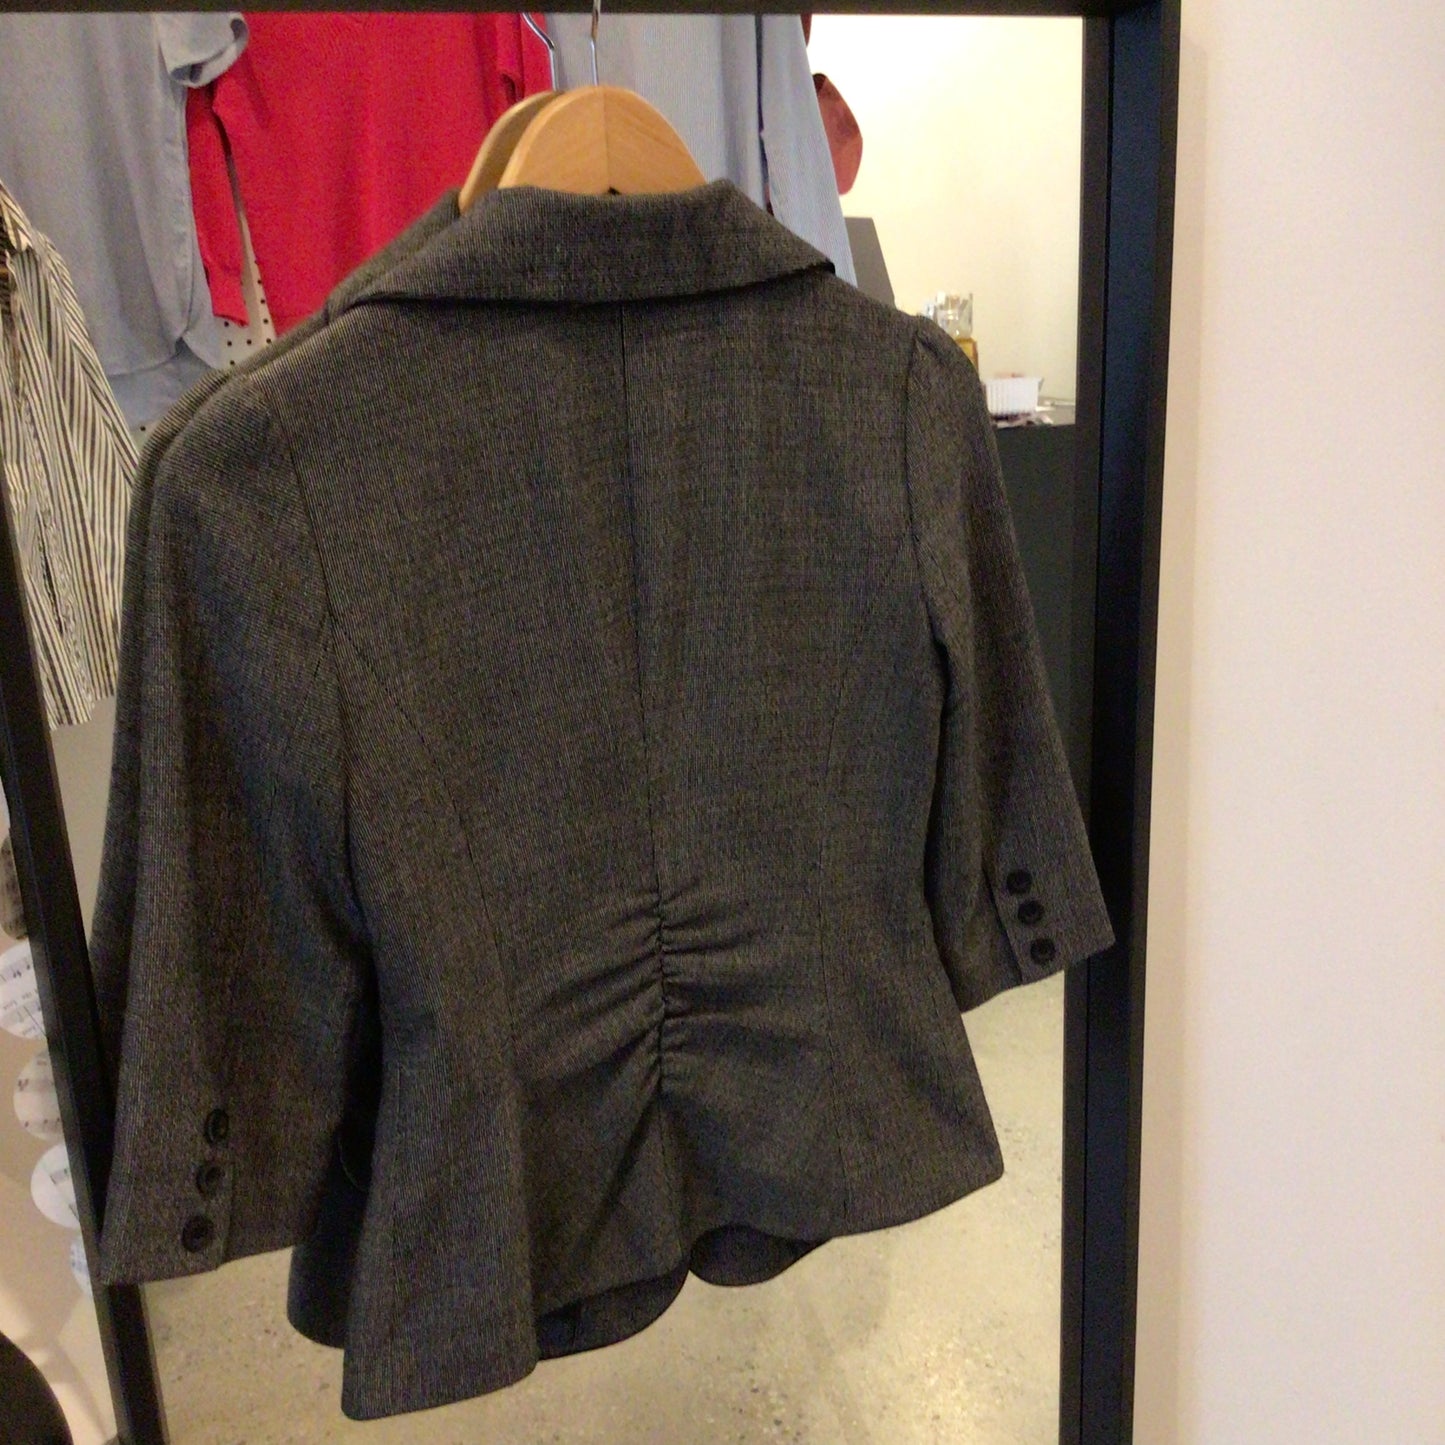 Consignment 1011-13 Grey 3/4 sleeve jacket size x-sm